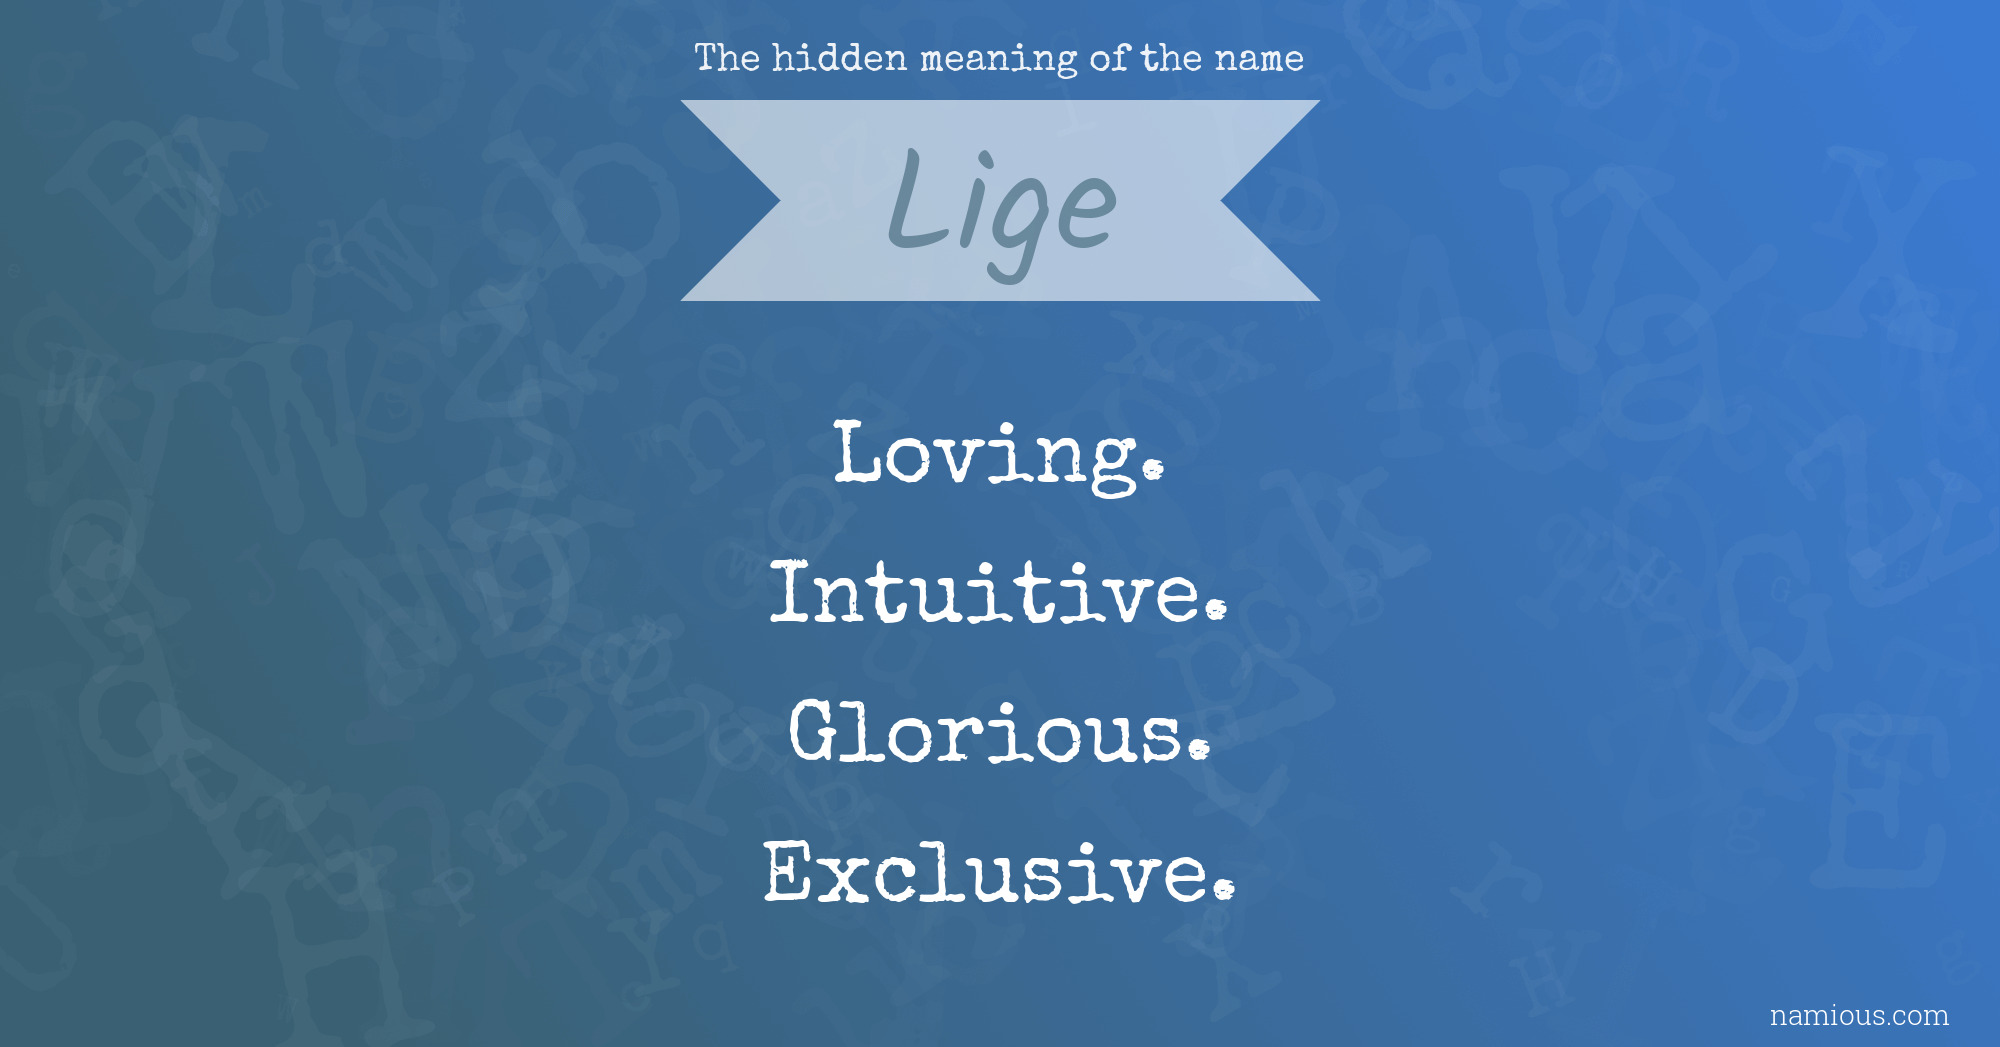 The hidden meaning of the name Lige